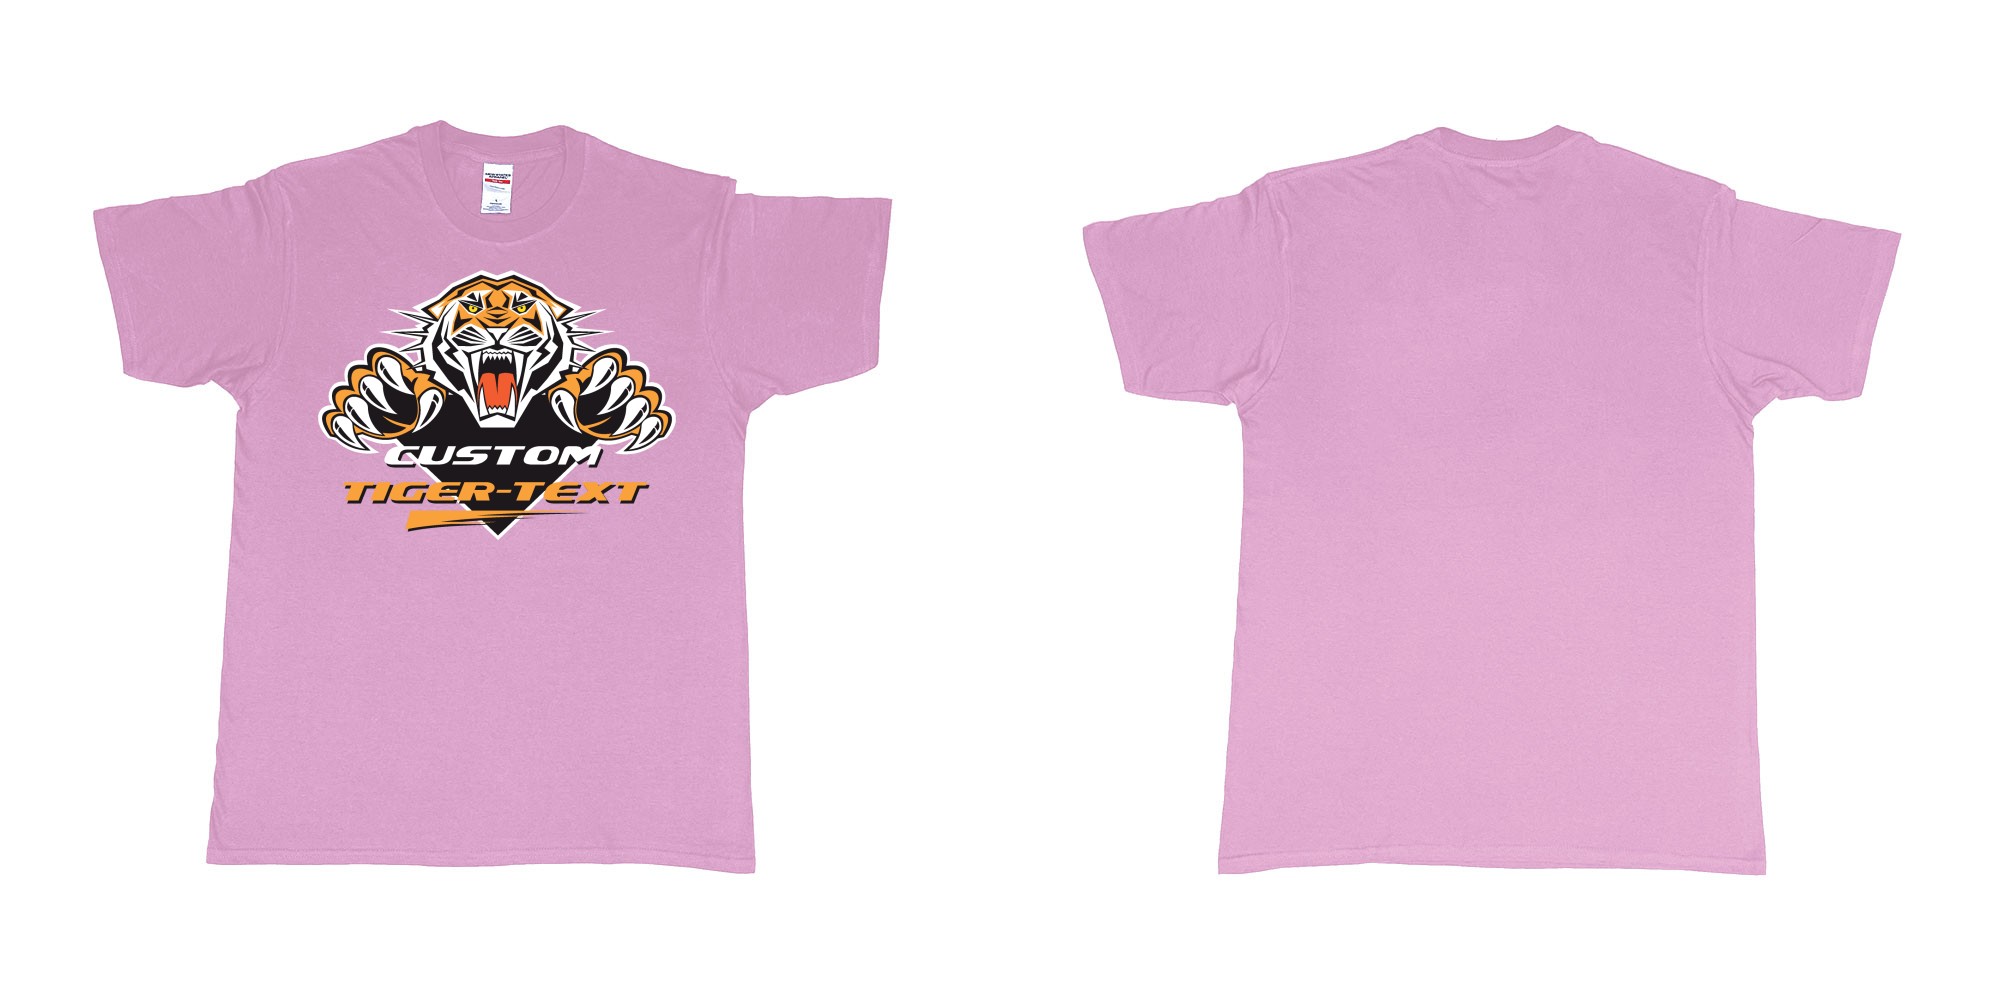 Custom tshirt design the wests tigers sydney national rugby league custom tshirt print in fabric color light-pink choice your own text made in Bali by The Pirate Way